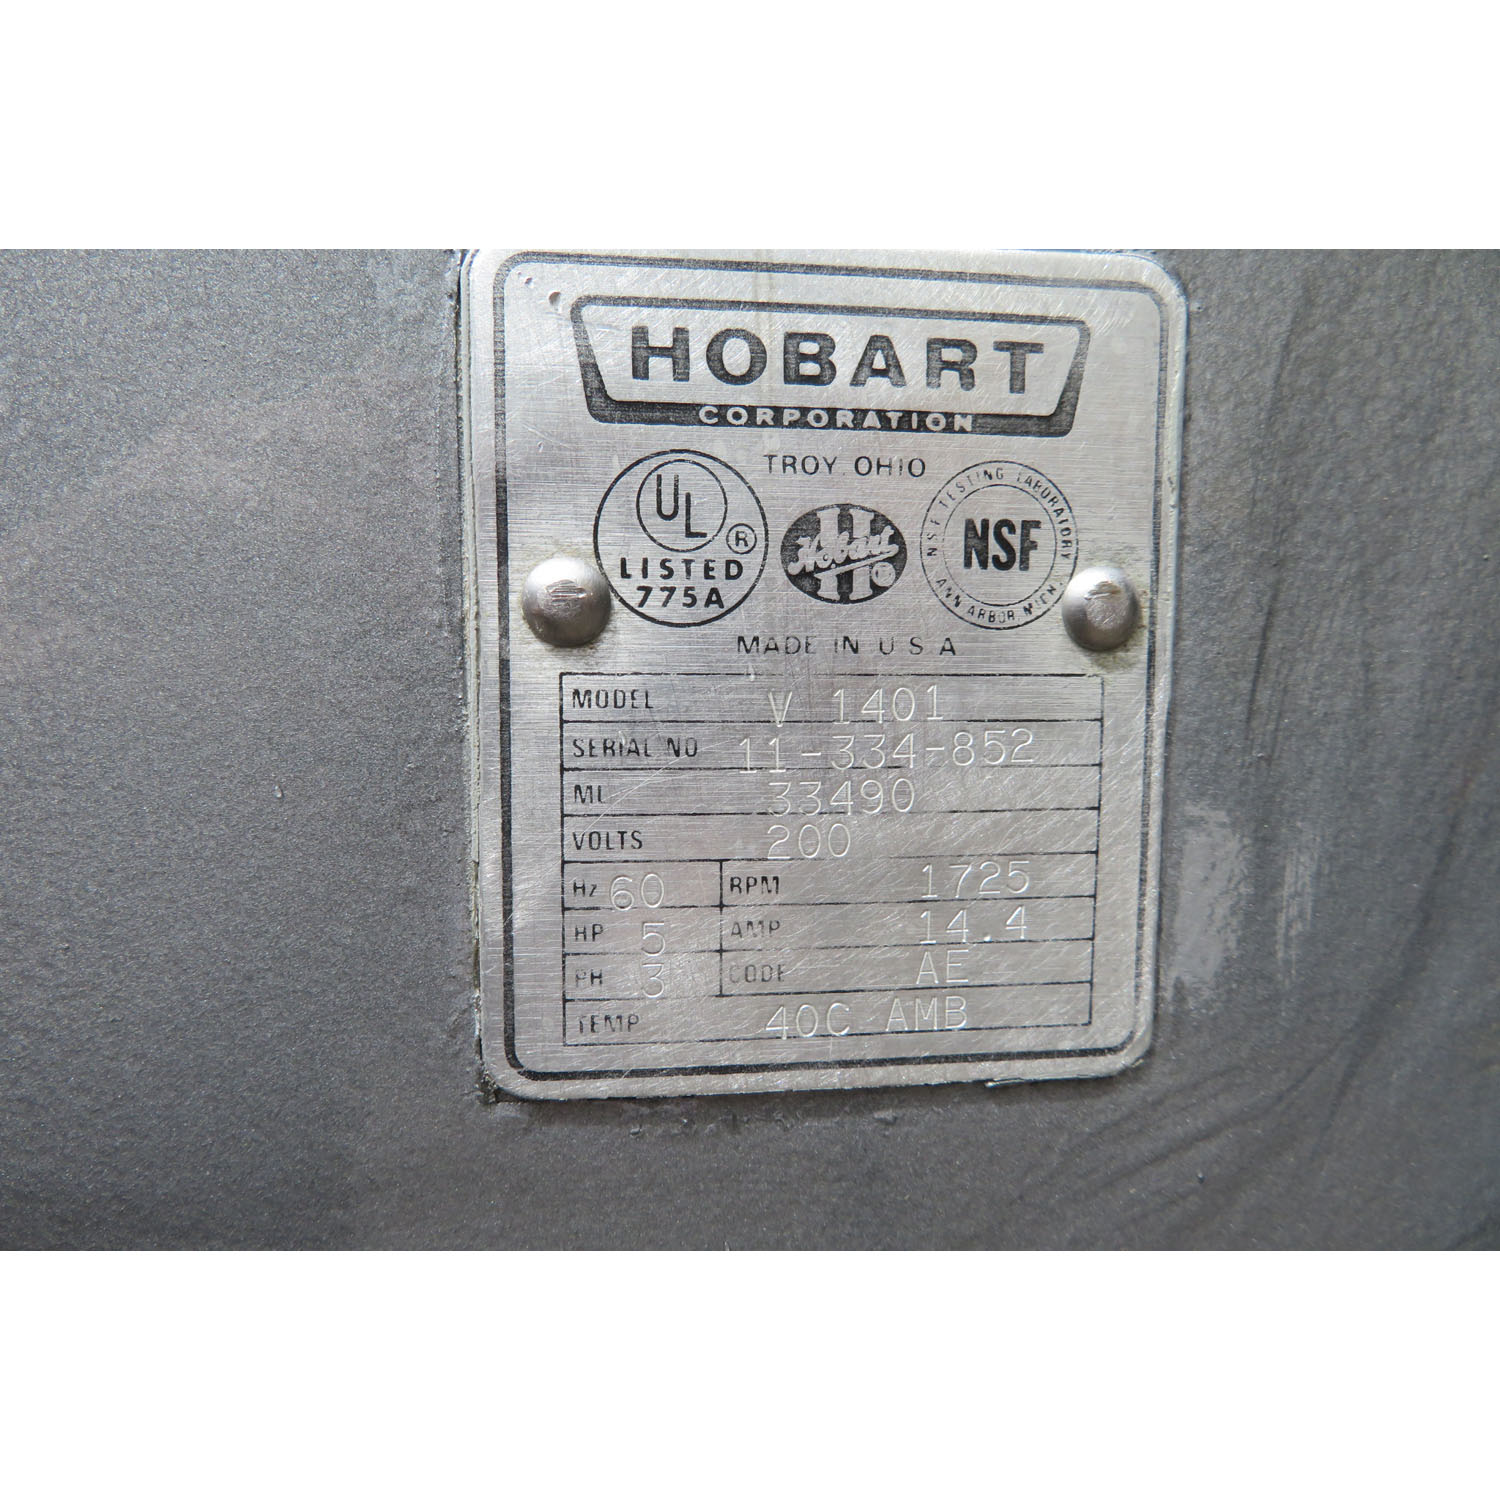 Hobart 140 Quart V1401 Mixer, Used Excellent Condition image 3